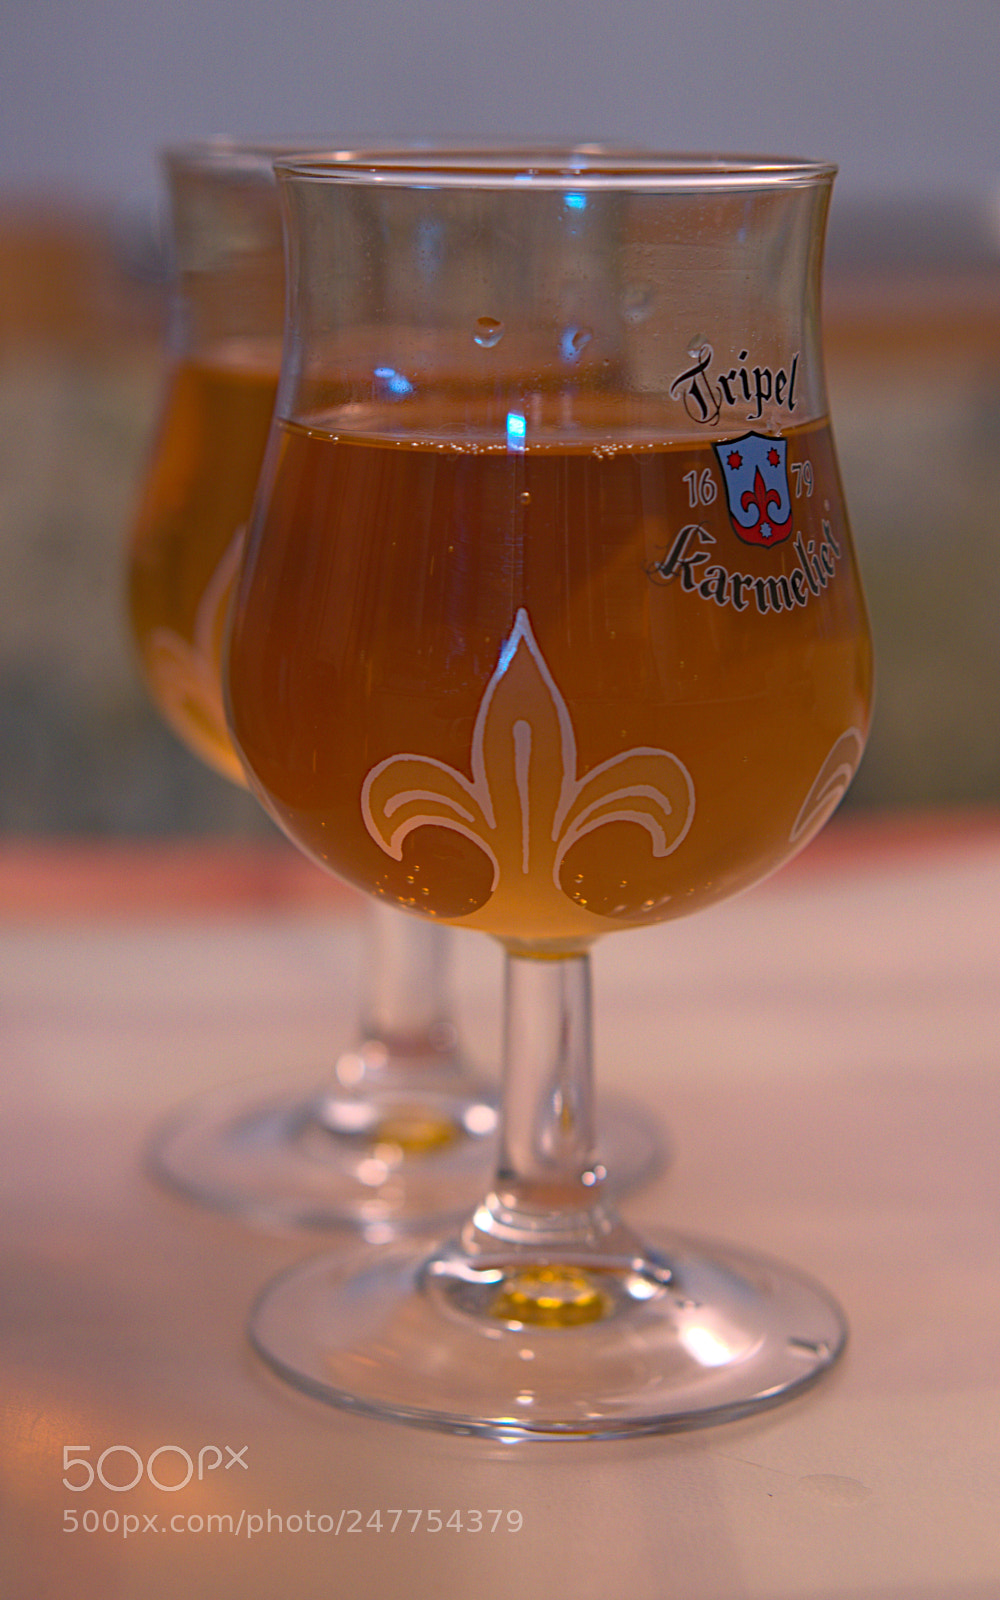 Sony Alpha NEX-5T sample photo. Two glasses of cider photography